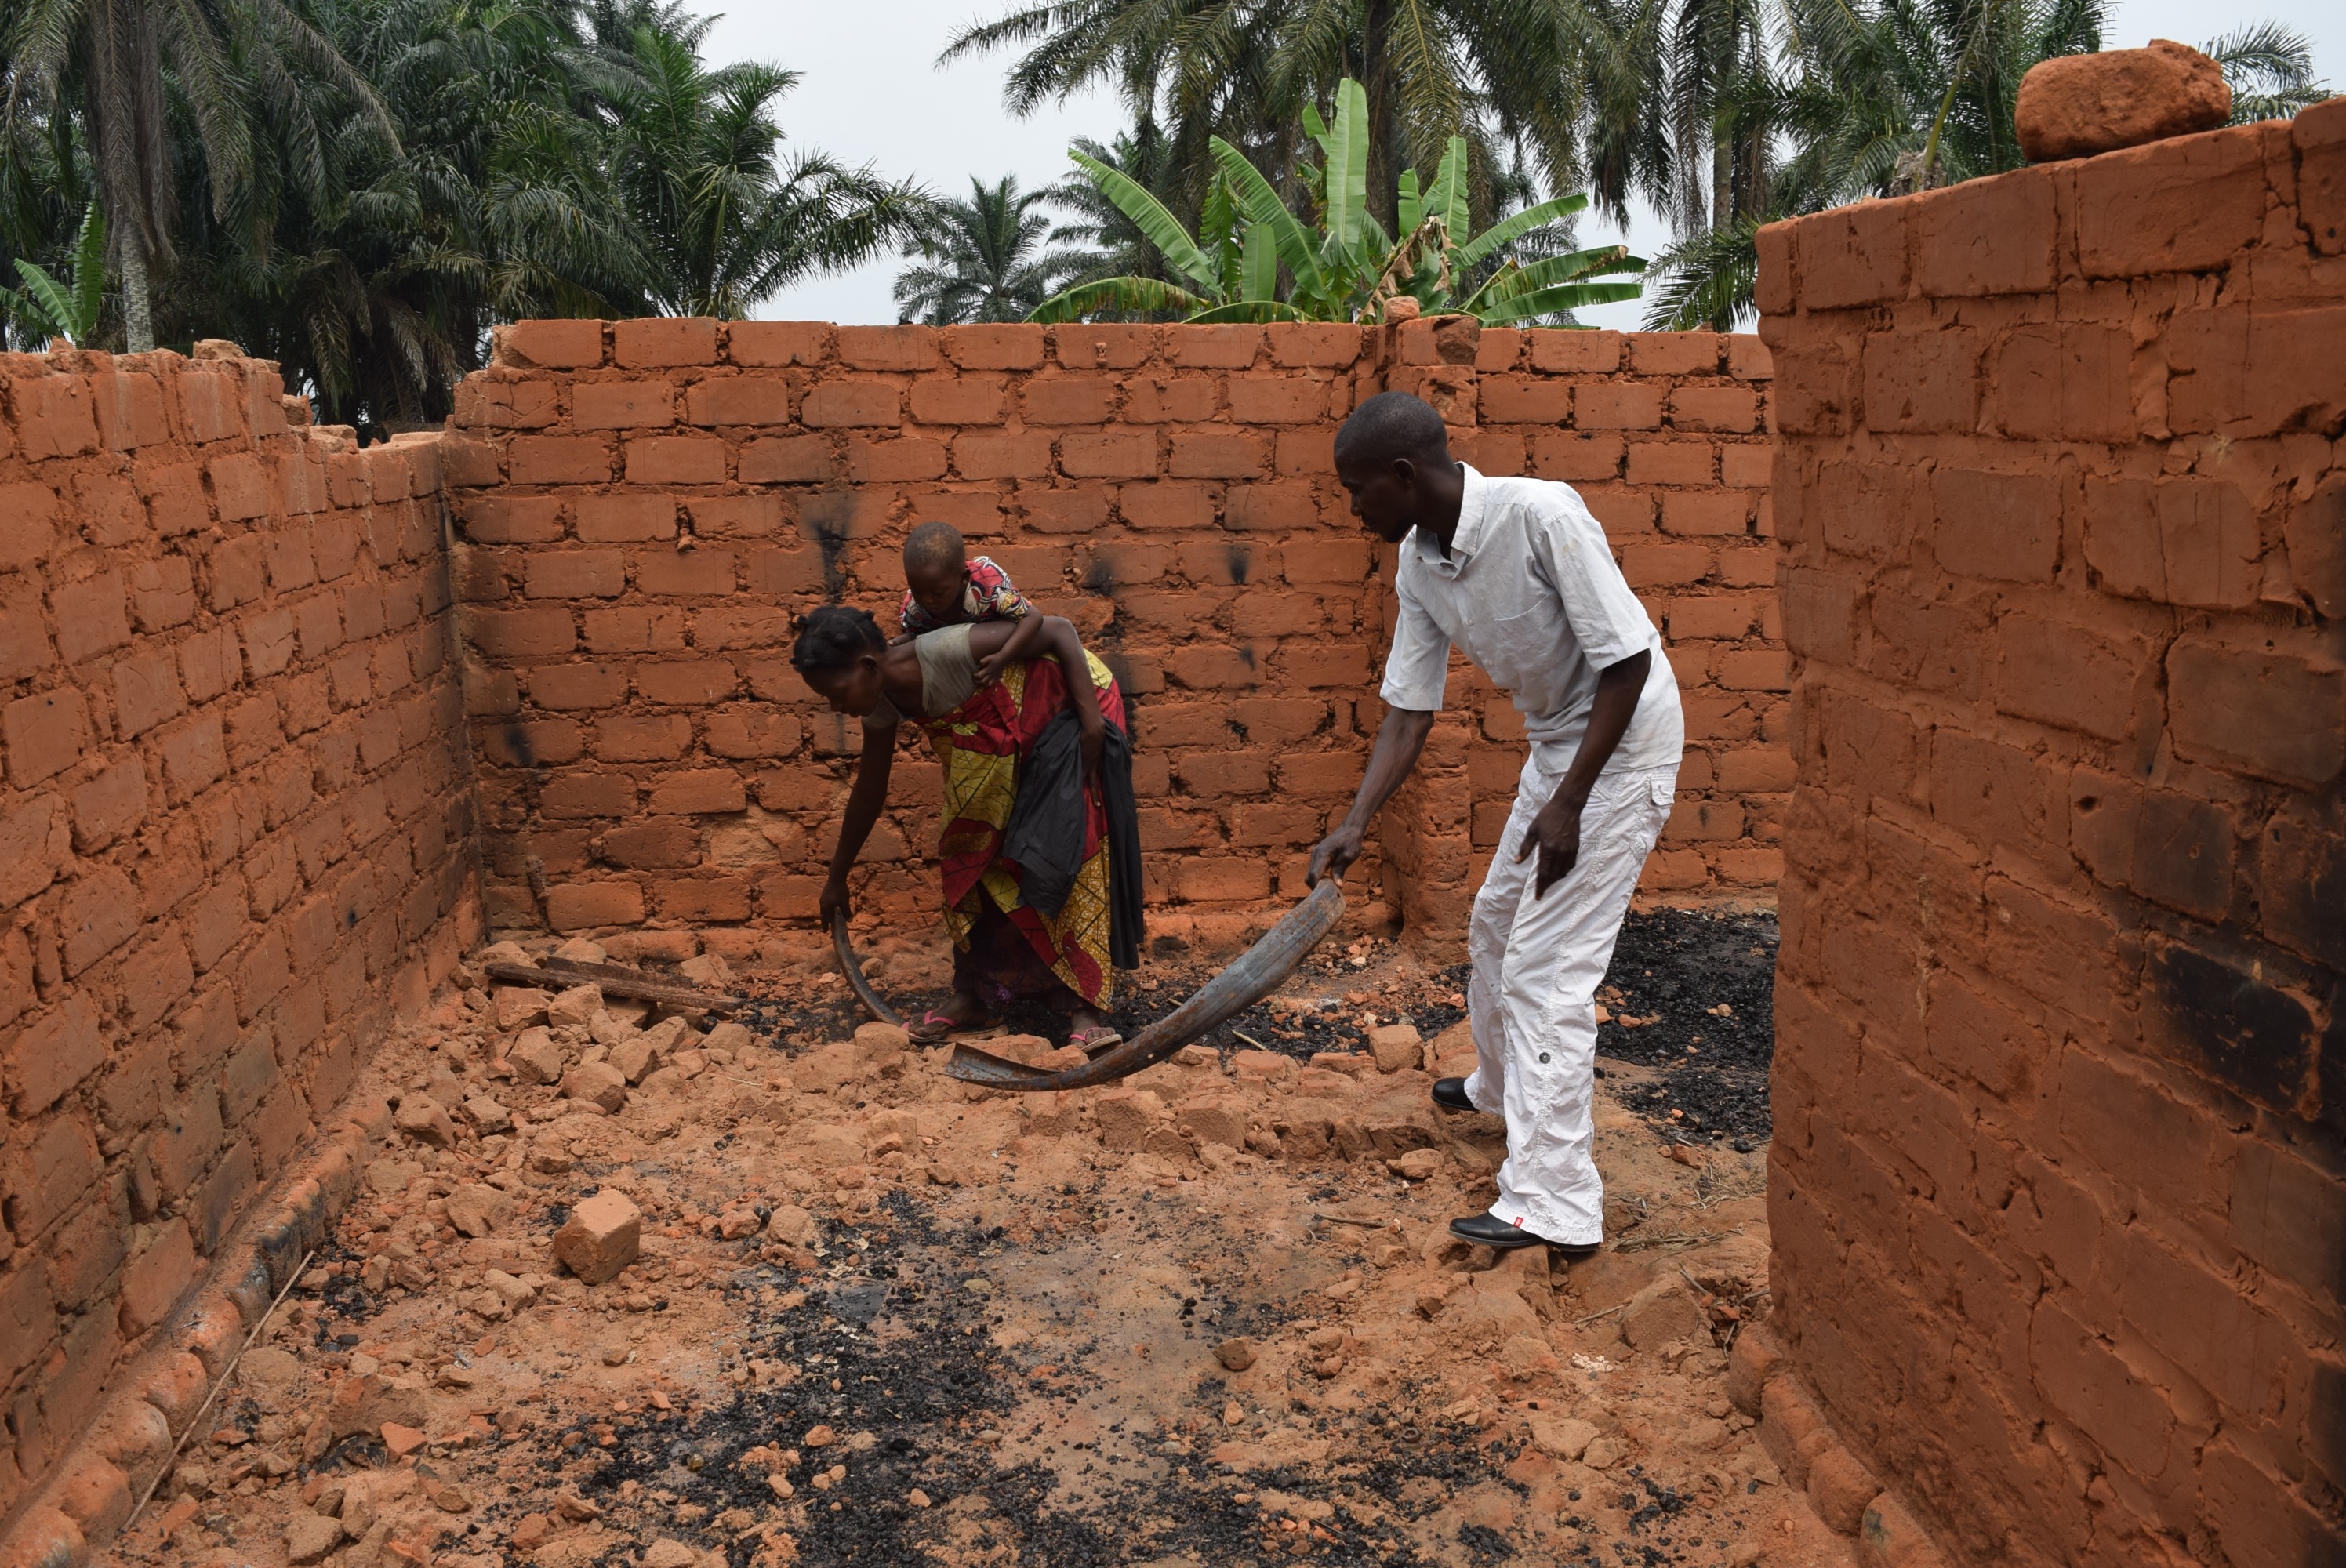 Mado and her family show the damage to their house when their village was attacked